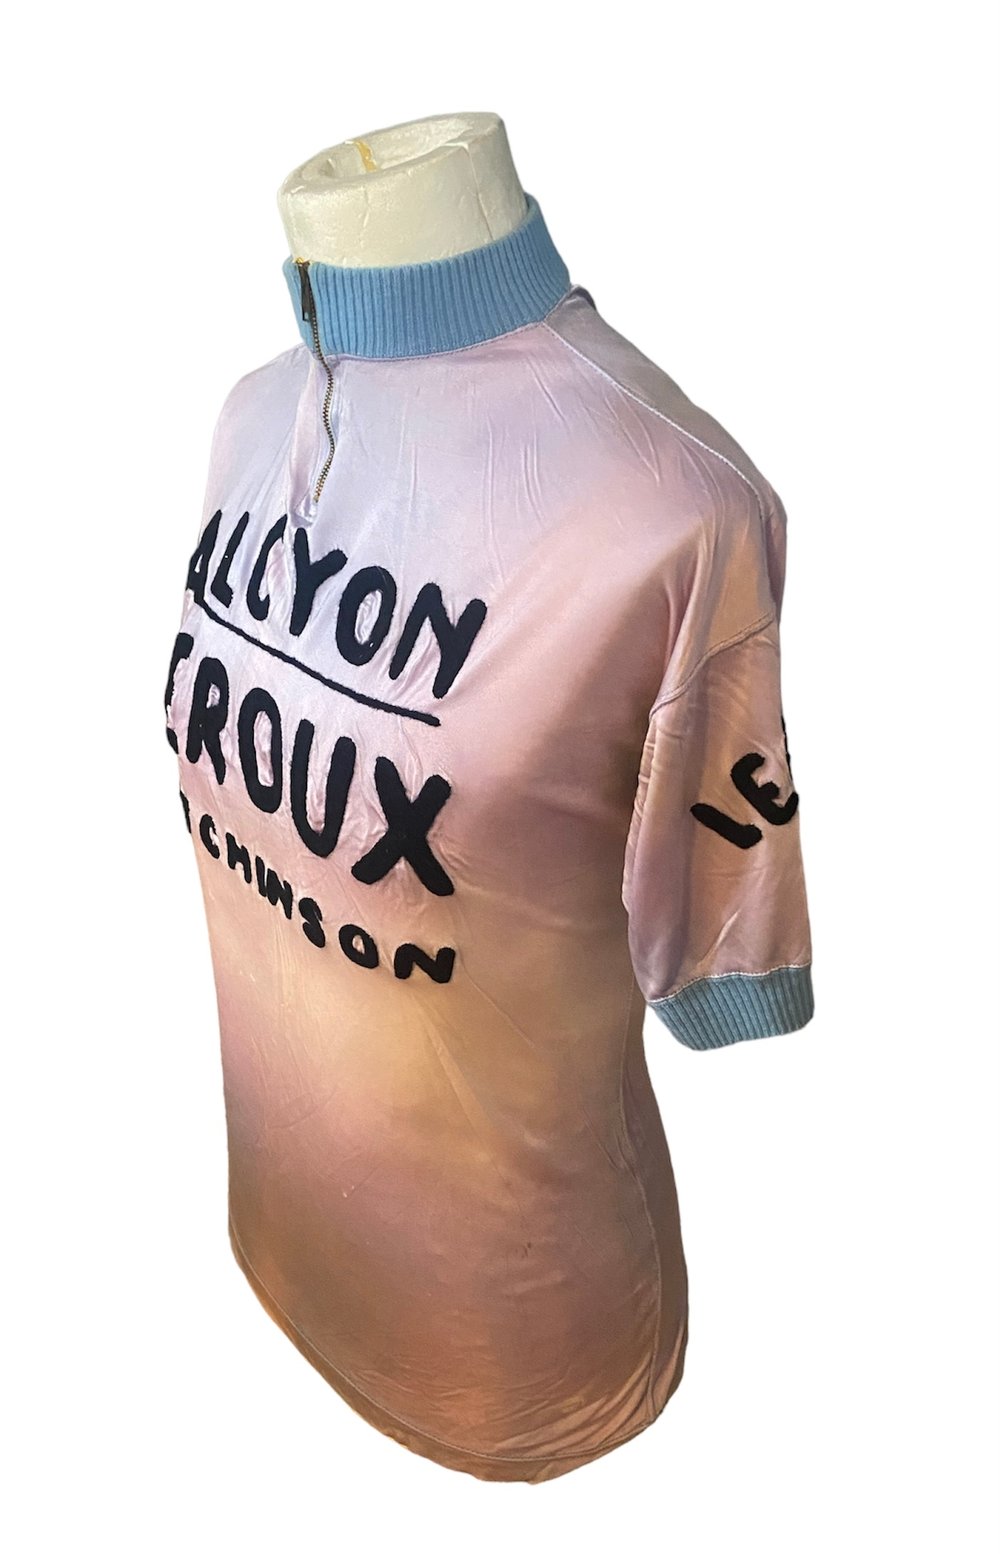 1961 - Alcyon-Leroux - Time Trial / Six-Day race 